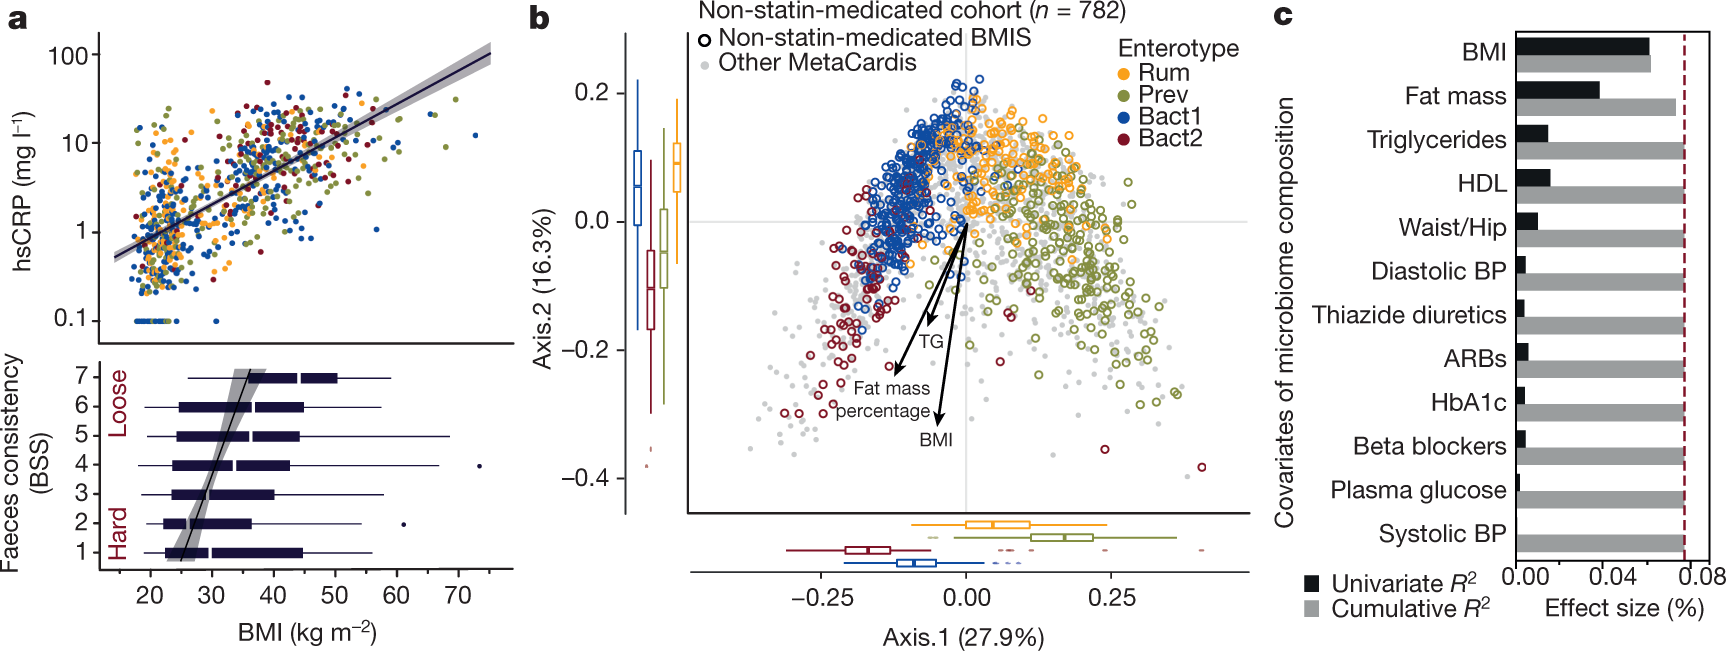 therapy is associated lower prevalence of gut microbiota dysbiosis | Nature